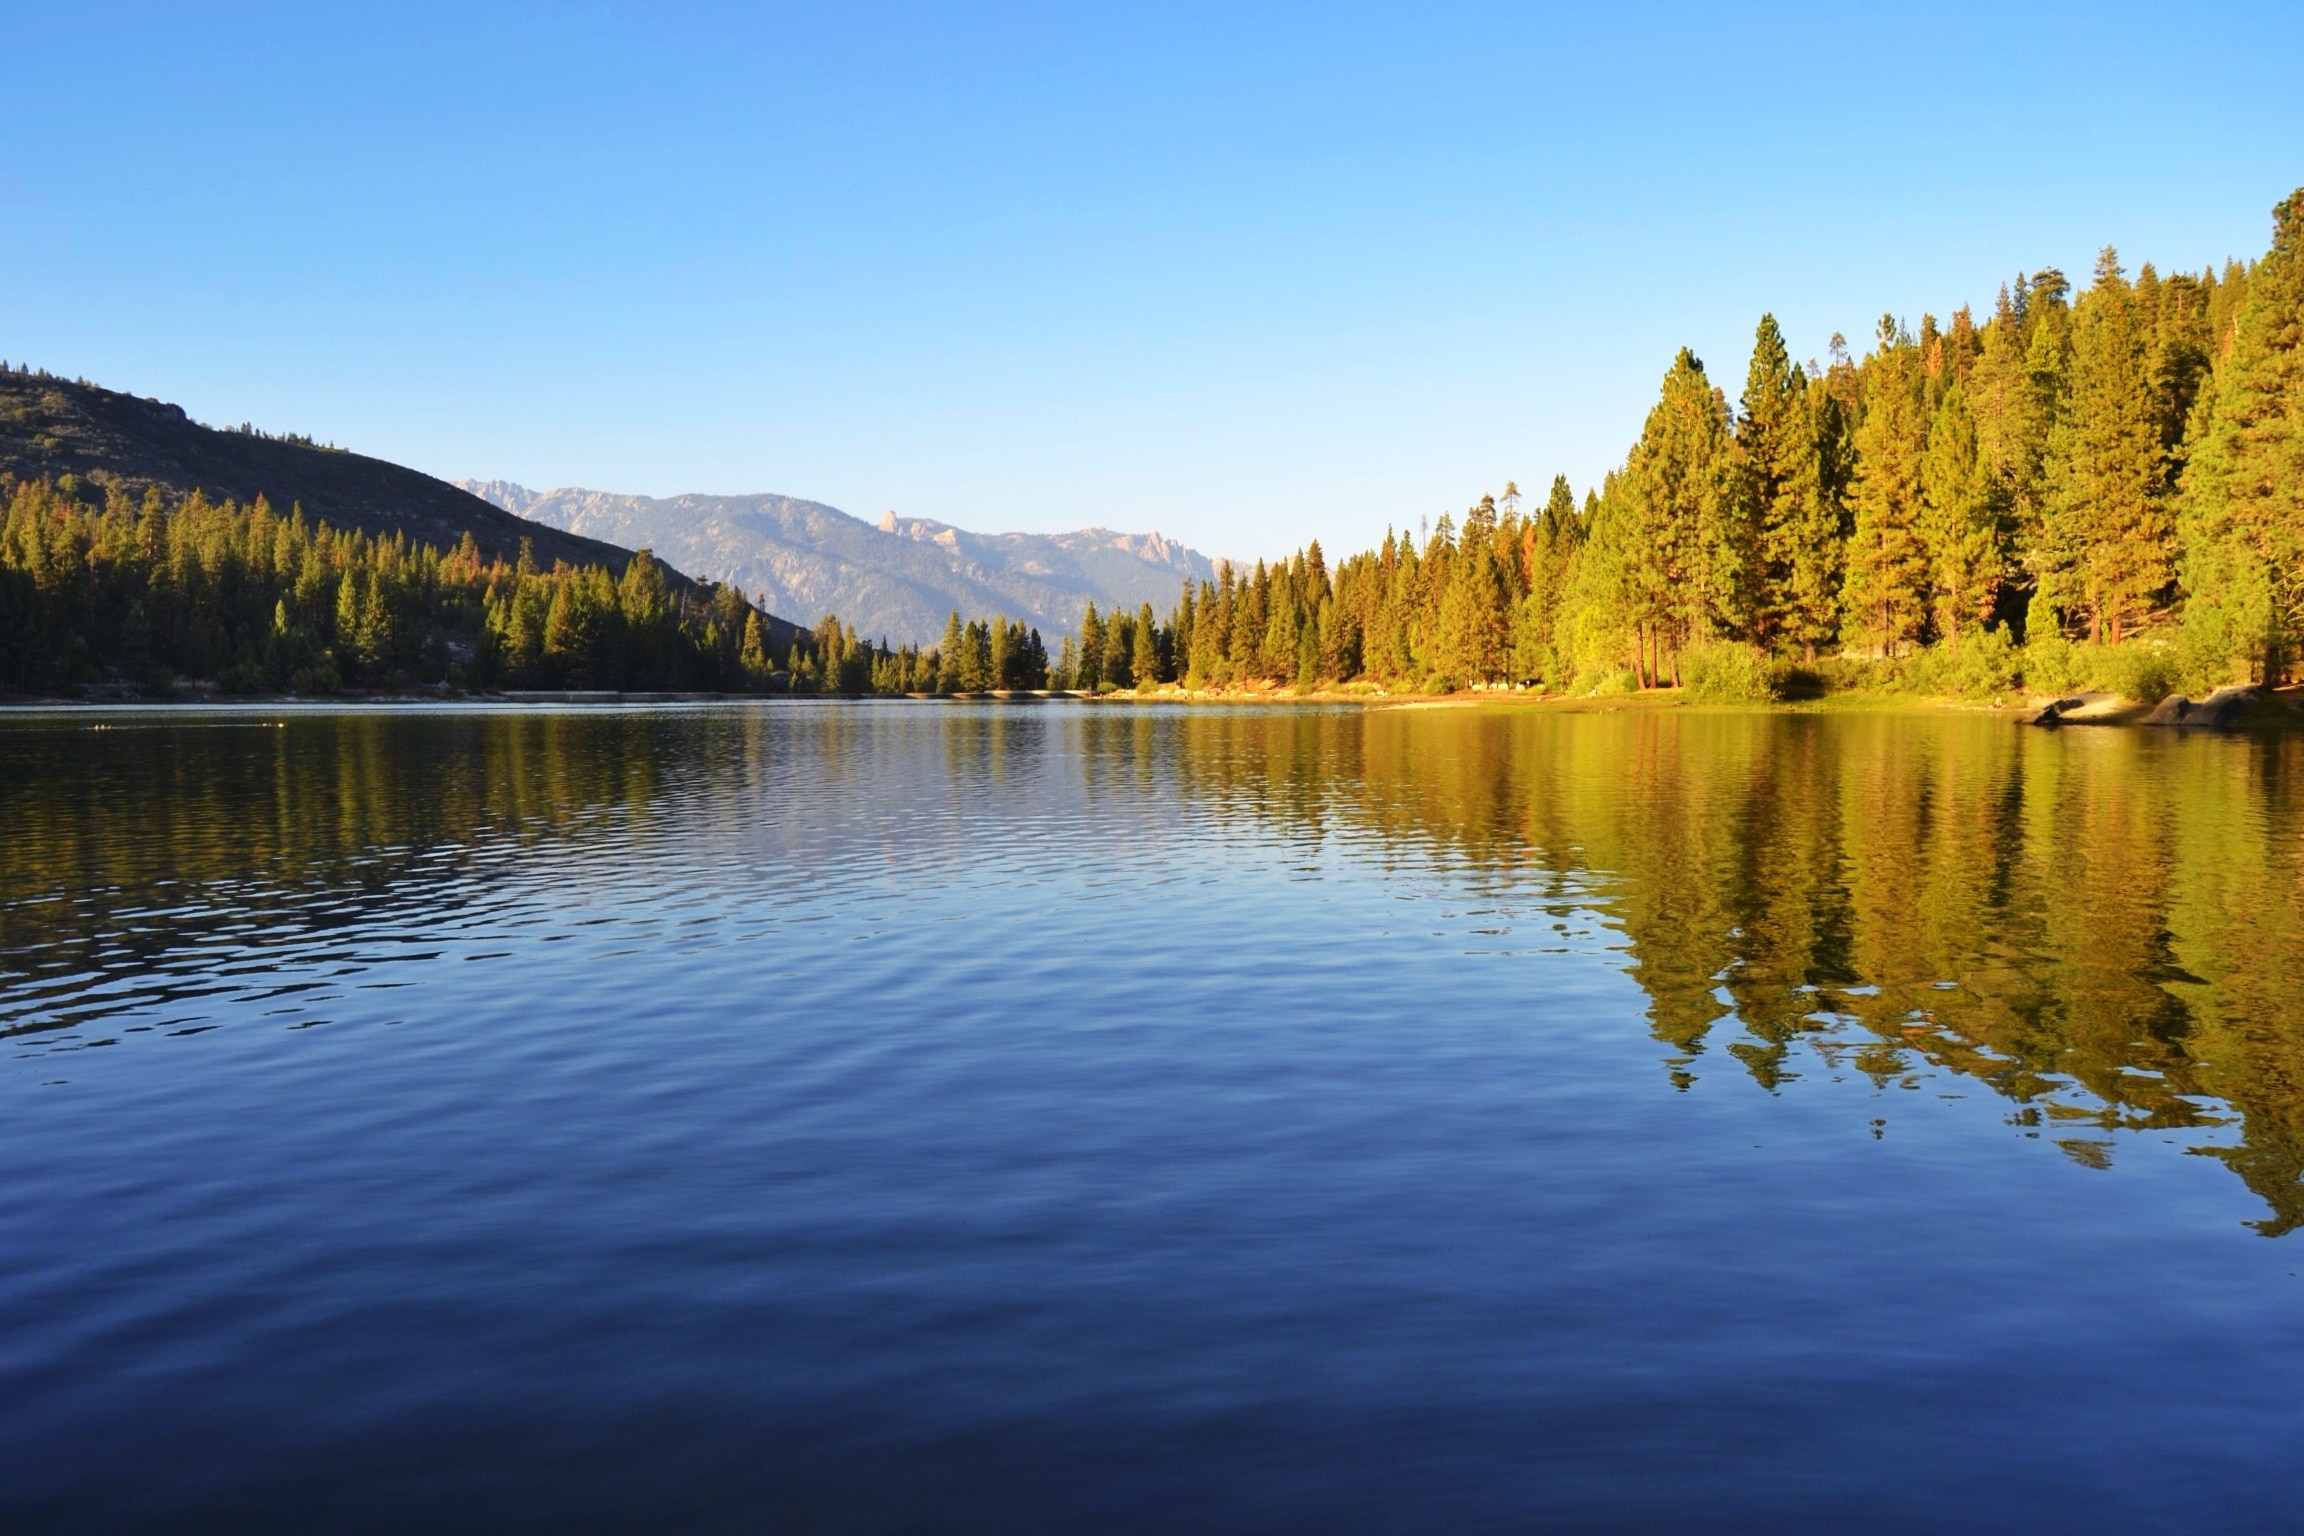 This is Hume Lake, in Kings Canyon National Park. It's a great spot for a picnic or a hike. There is a camp for children near the lake, so some small areas are shut to the public. #GoldenHour